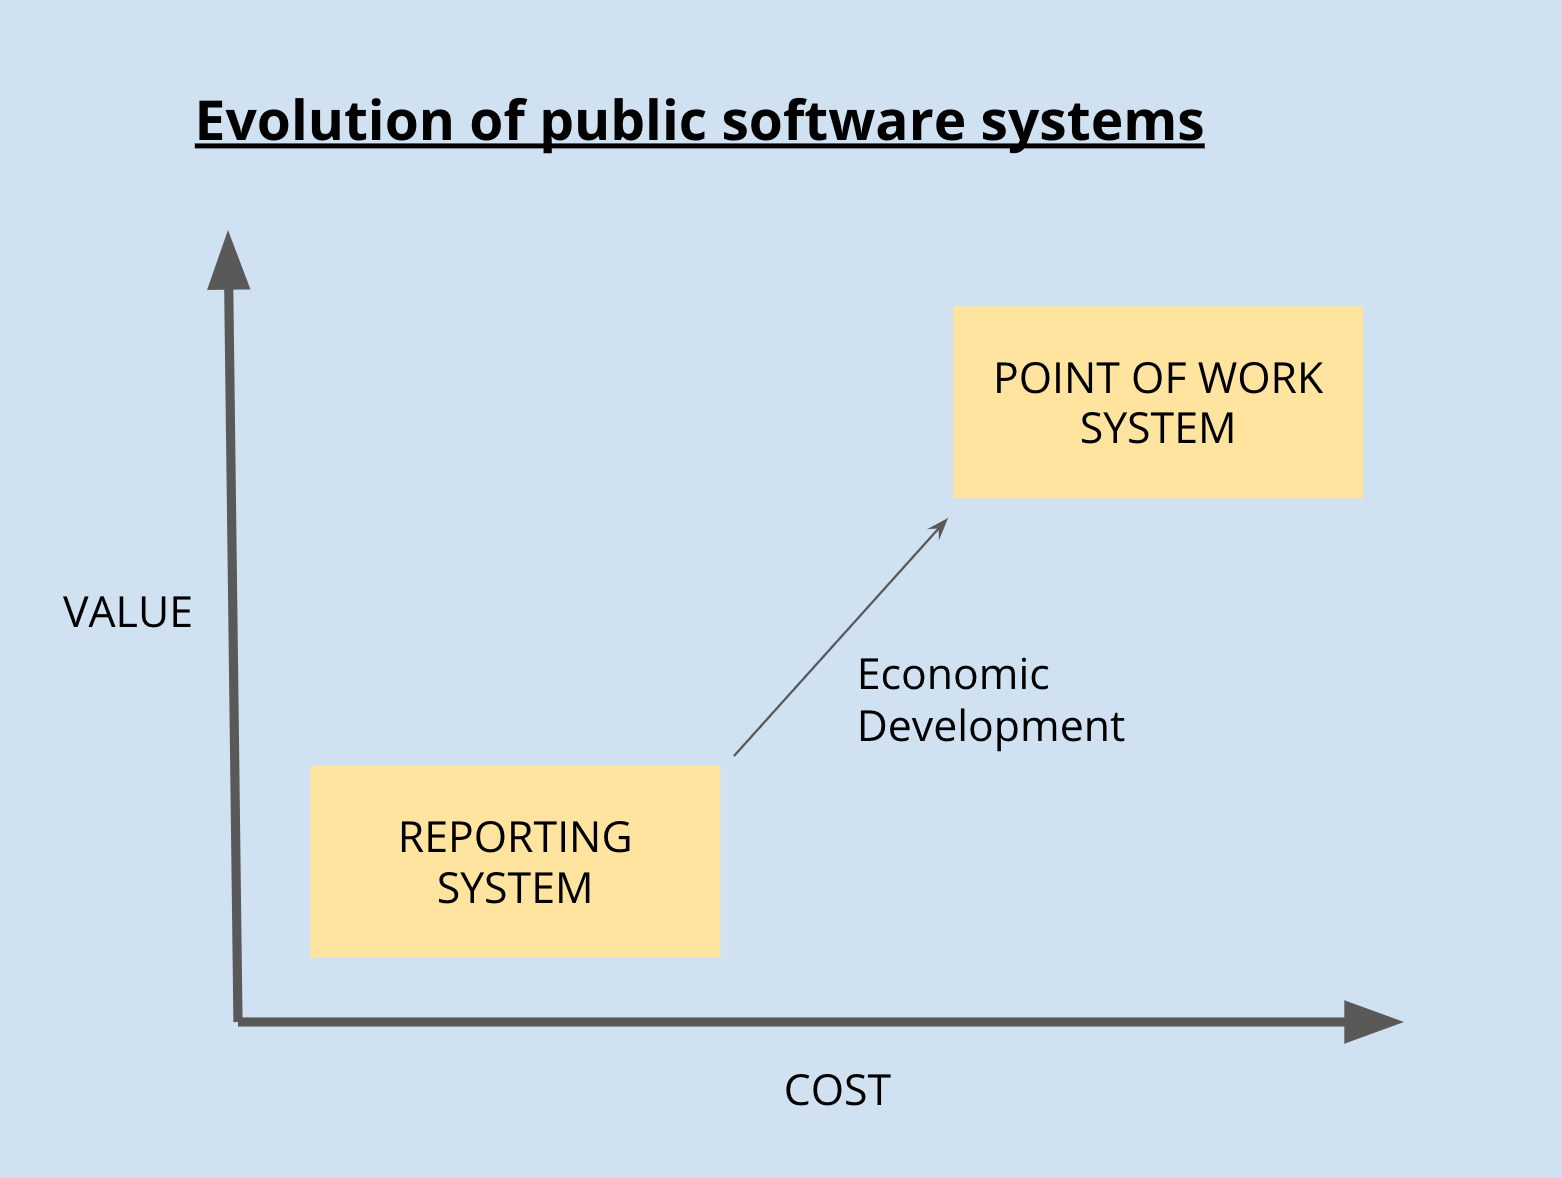 Evolution of public system from reporting systems to point-of-work systems